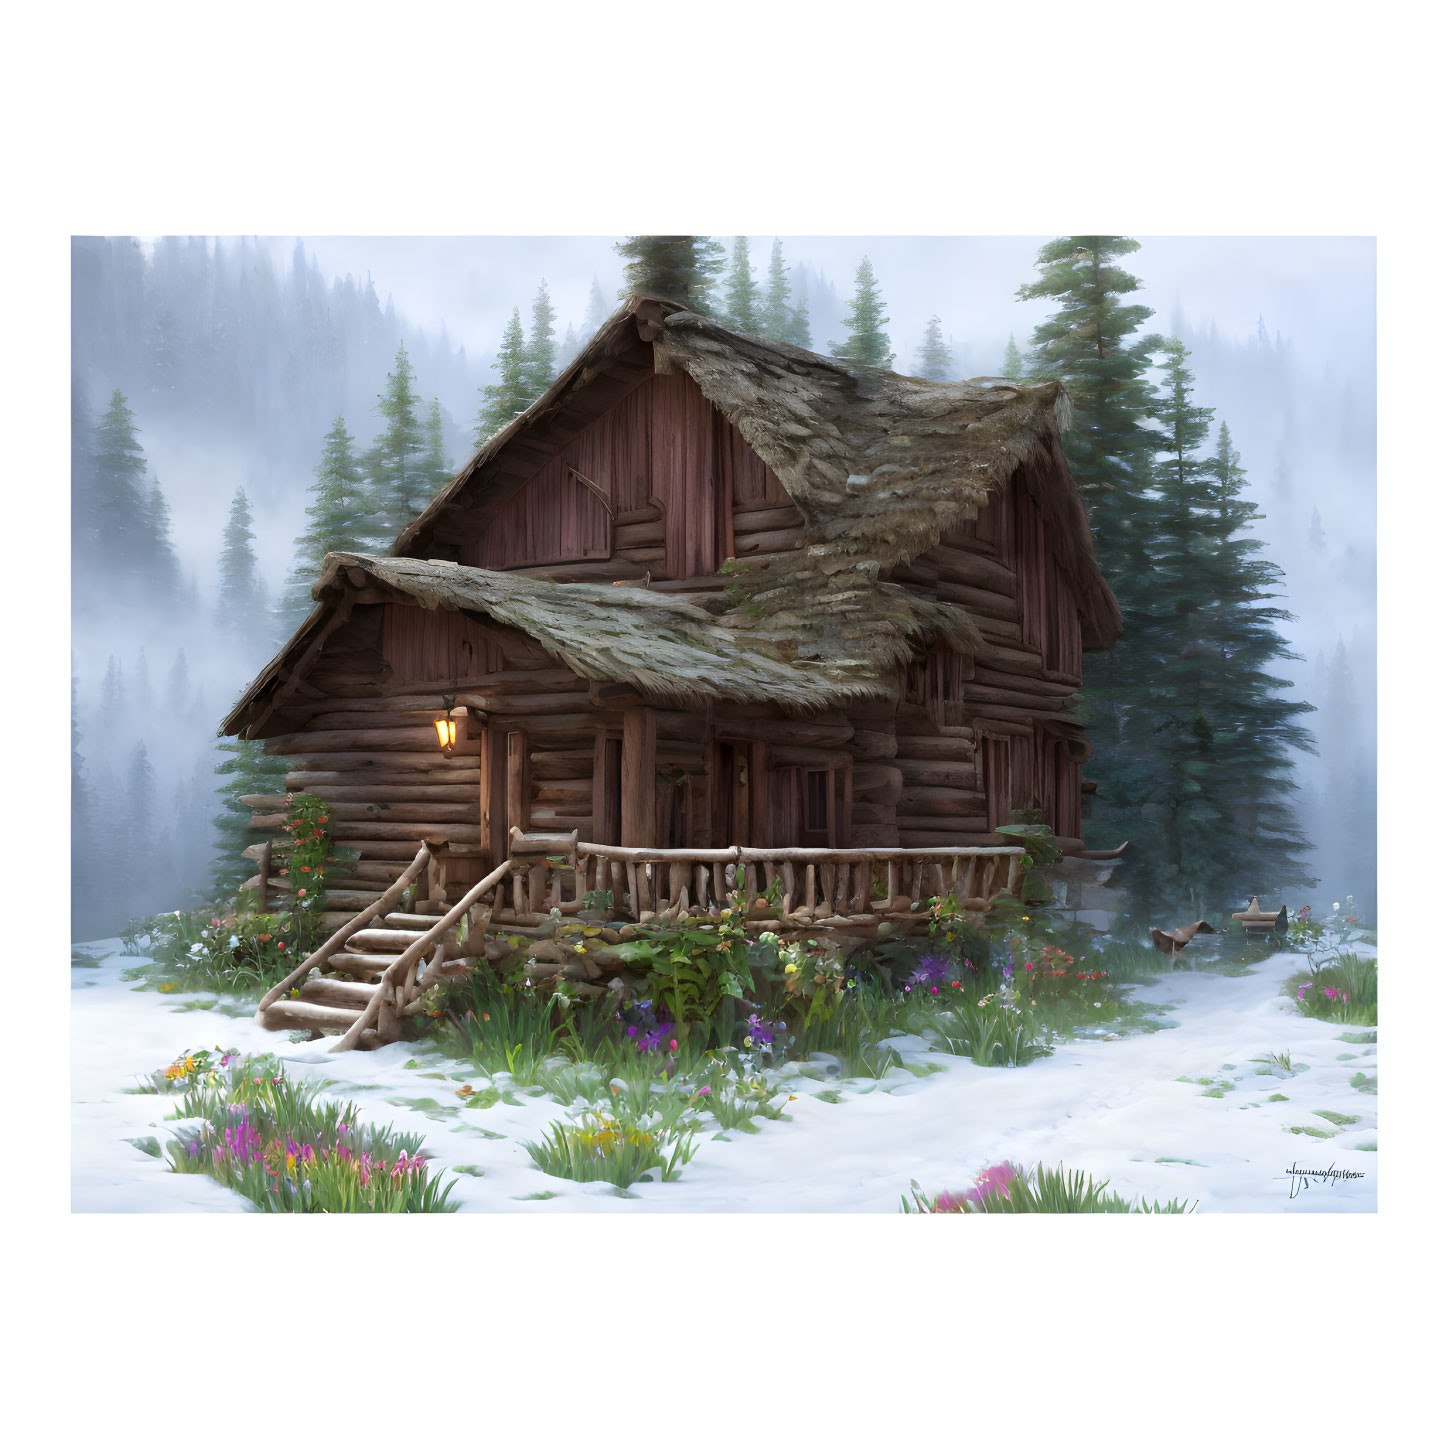 Snowy clearing with cozy wooden cabin and vibrant wildflowers